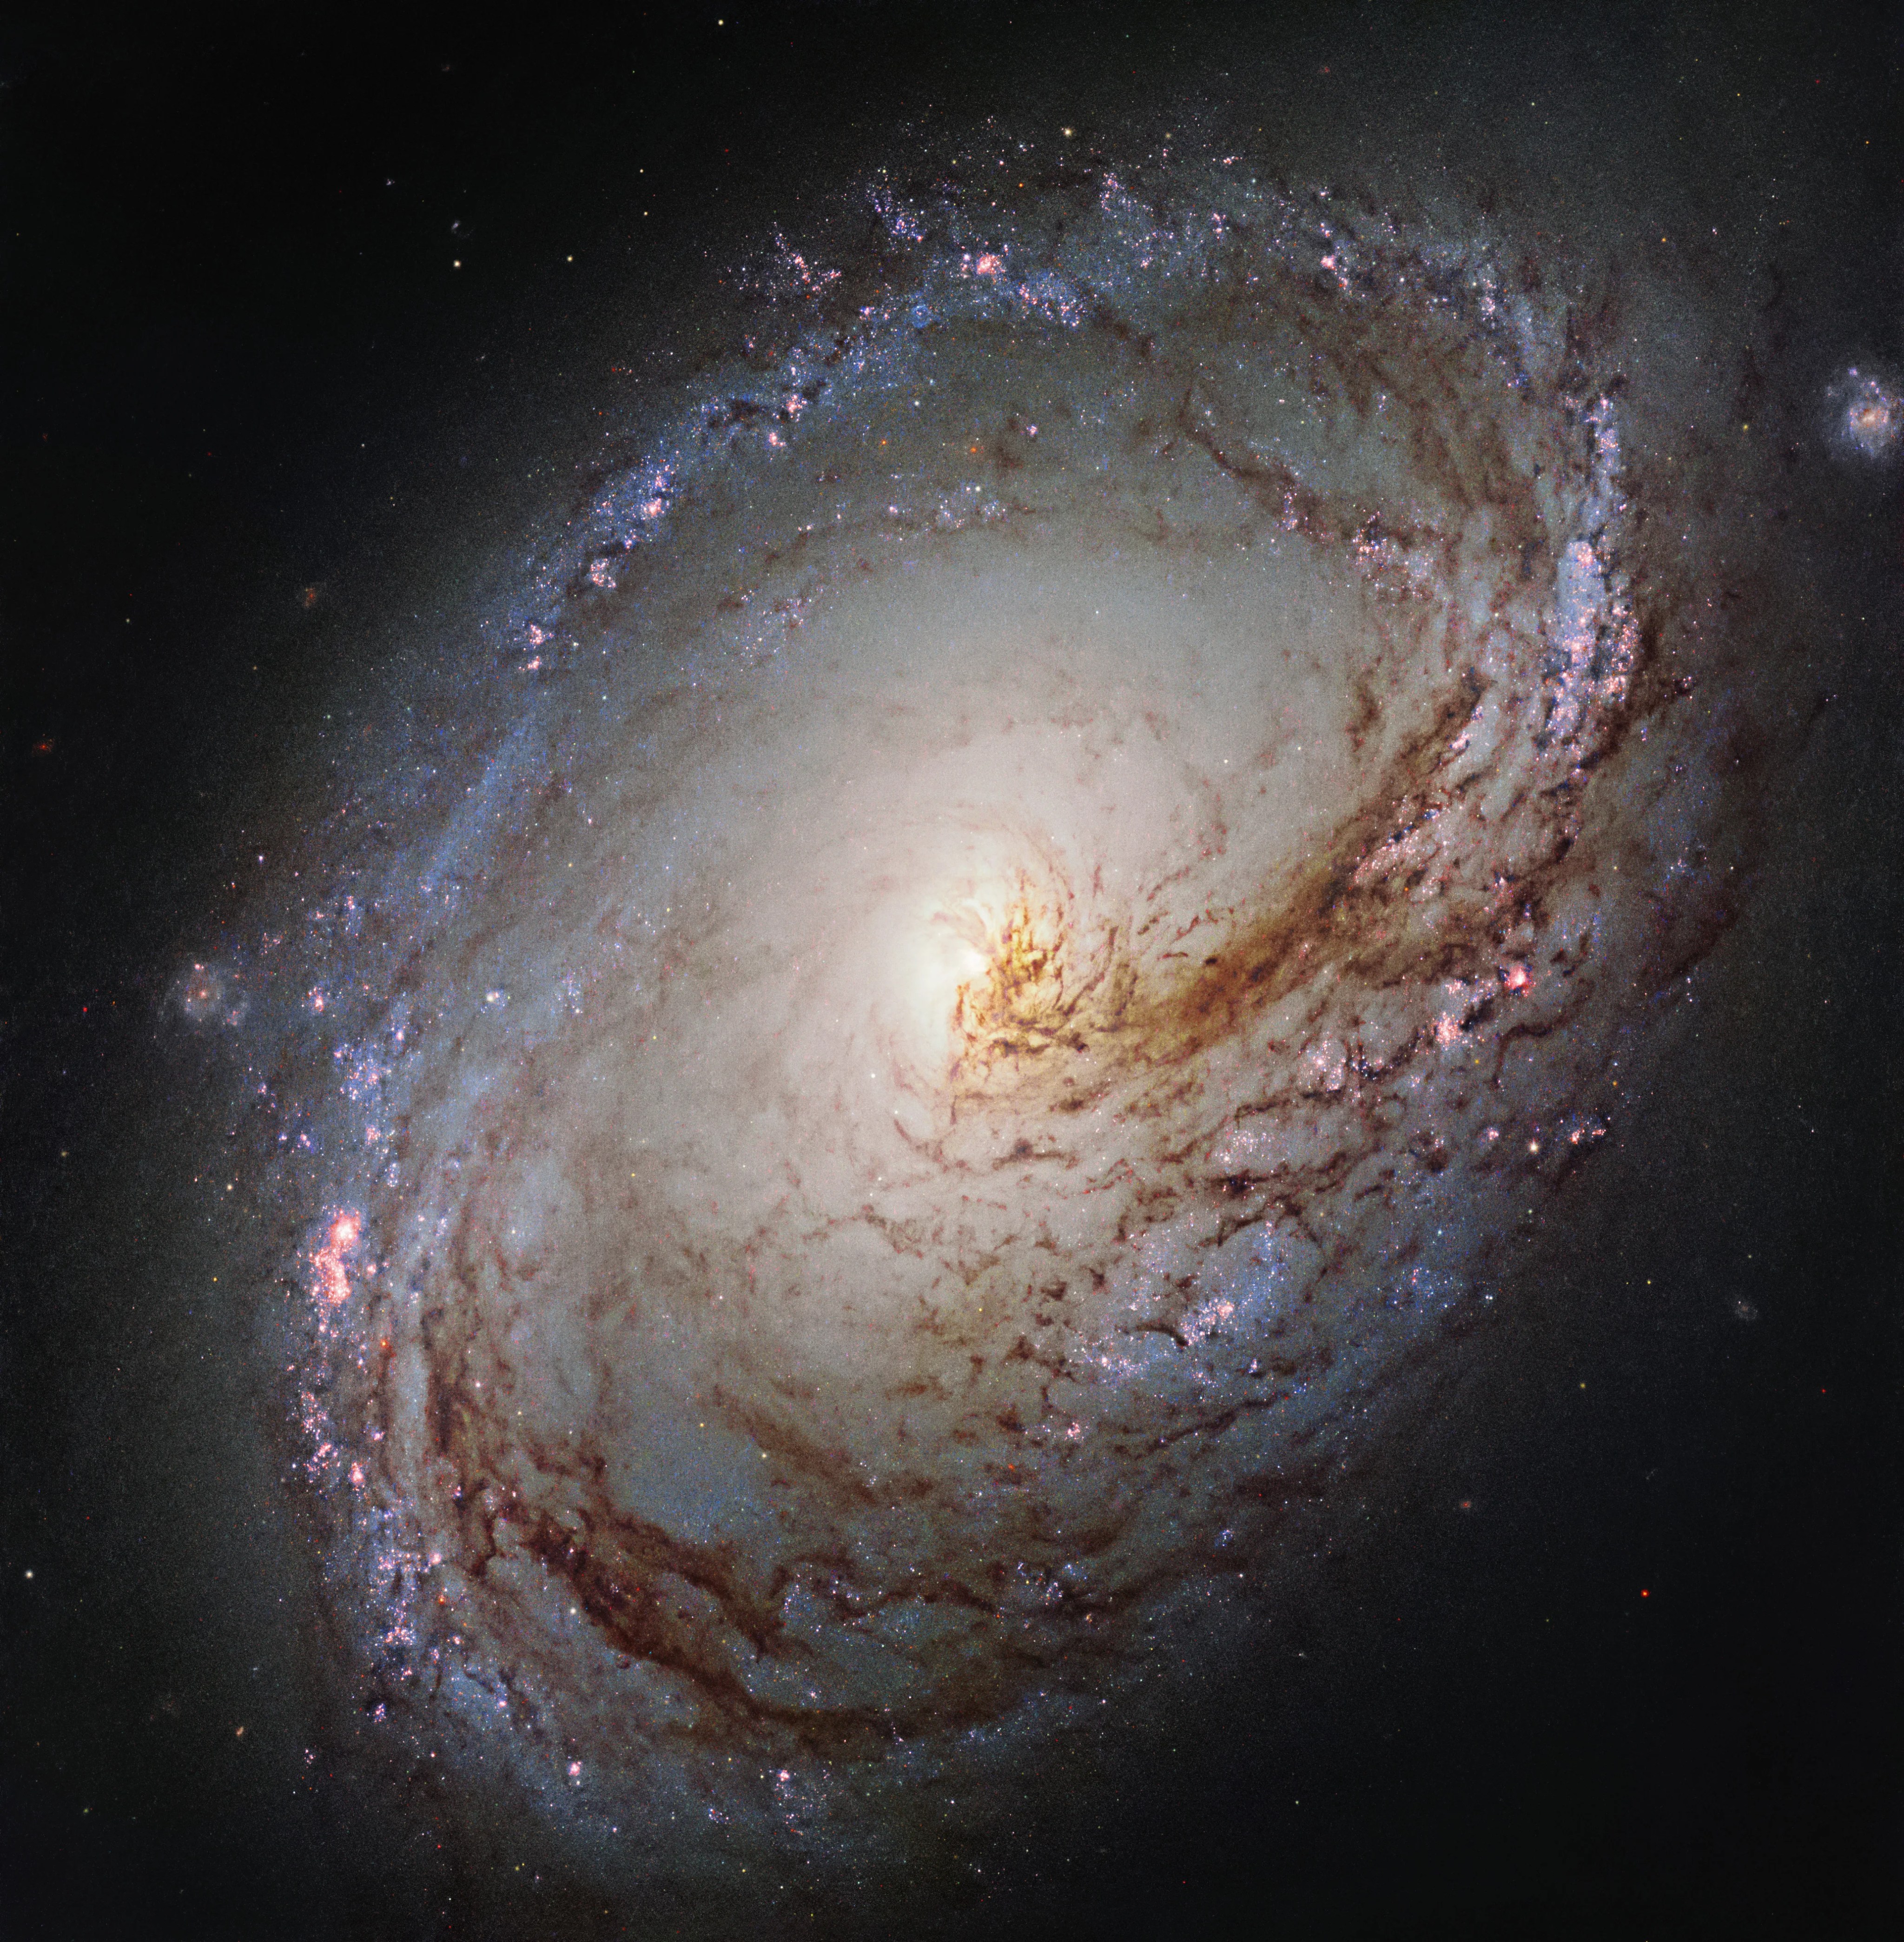 A spiral galaxy against black space. The galaxy's bright, yellow core is surrounded by spiraling arms laced with dark brown dust and pink and purple bursts of star formation.